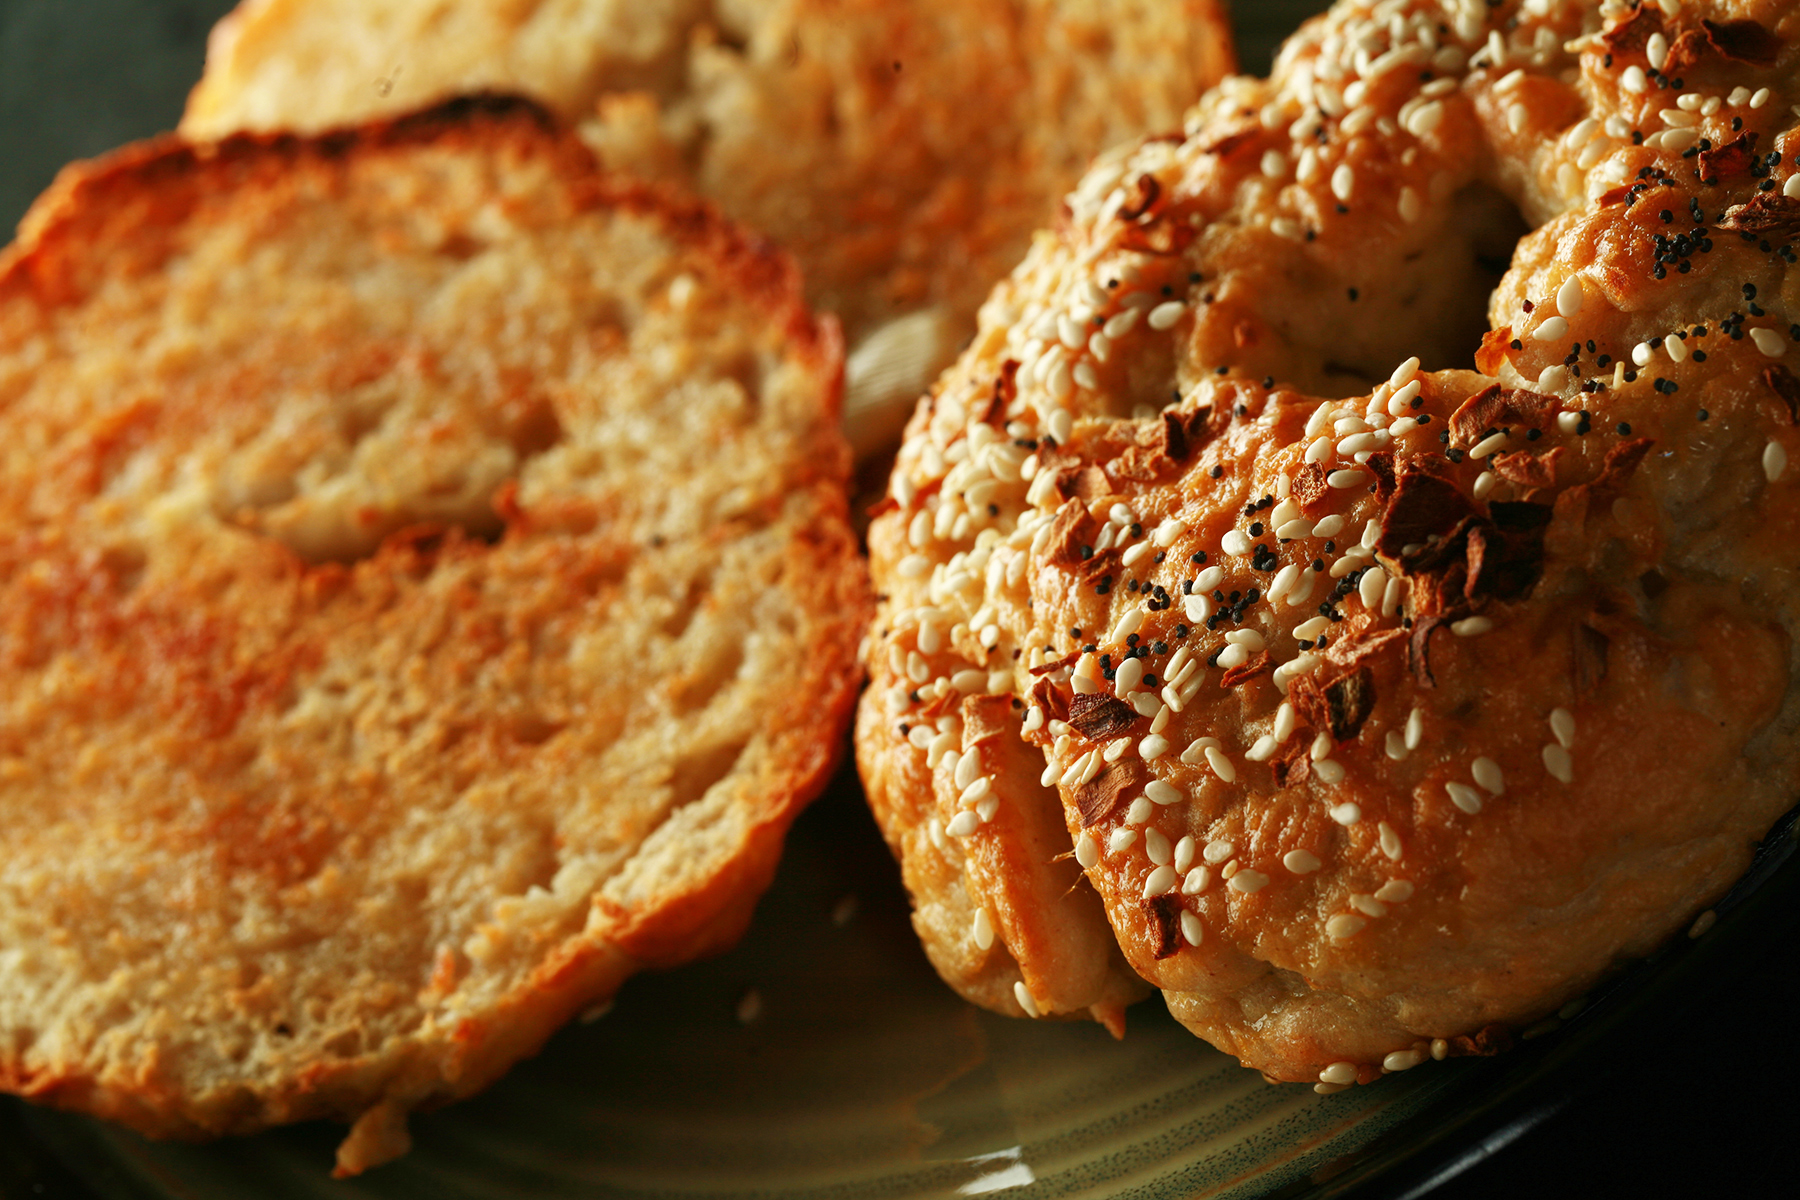 A close up view of two toasted gluten-free bagels on a plate. One is coated with everything seasoning.